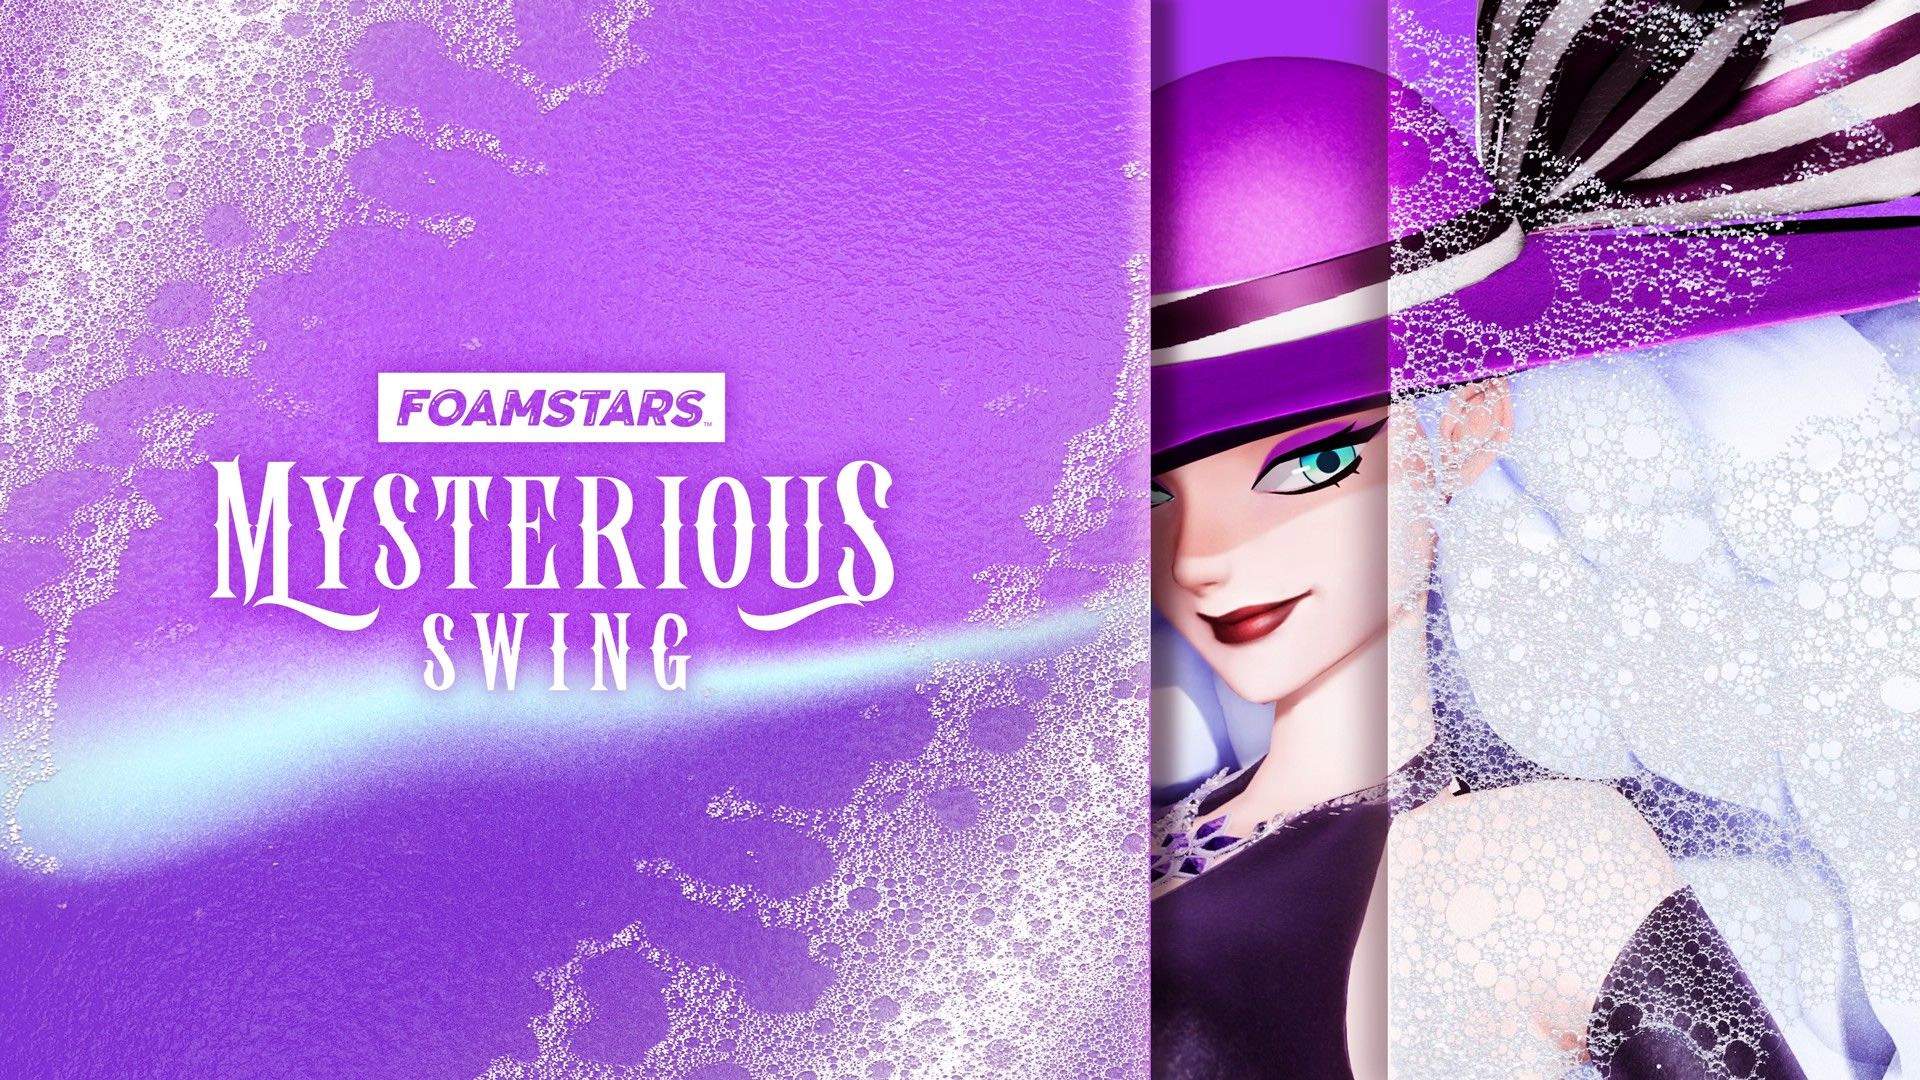 The brand new FOAMSTAR Chloe Noir is shown behind the new season text reading MYSTERIOUS SWING